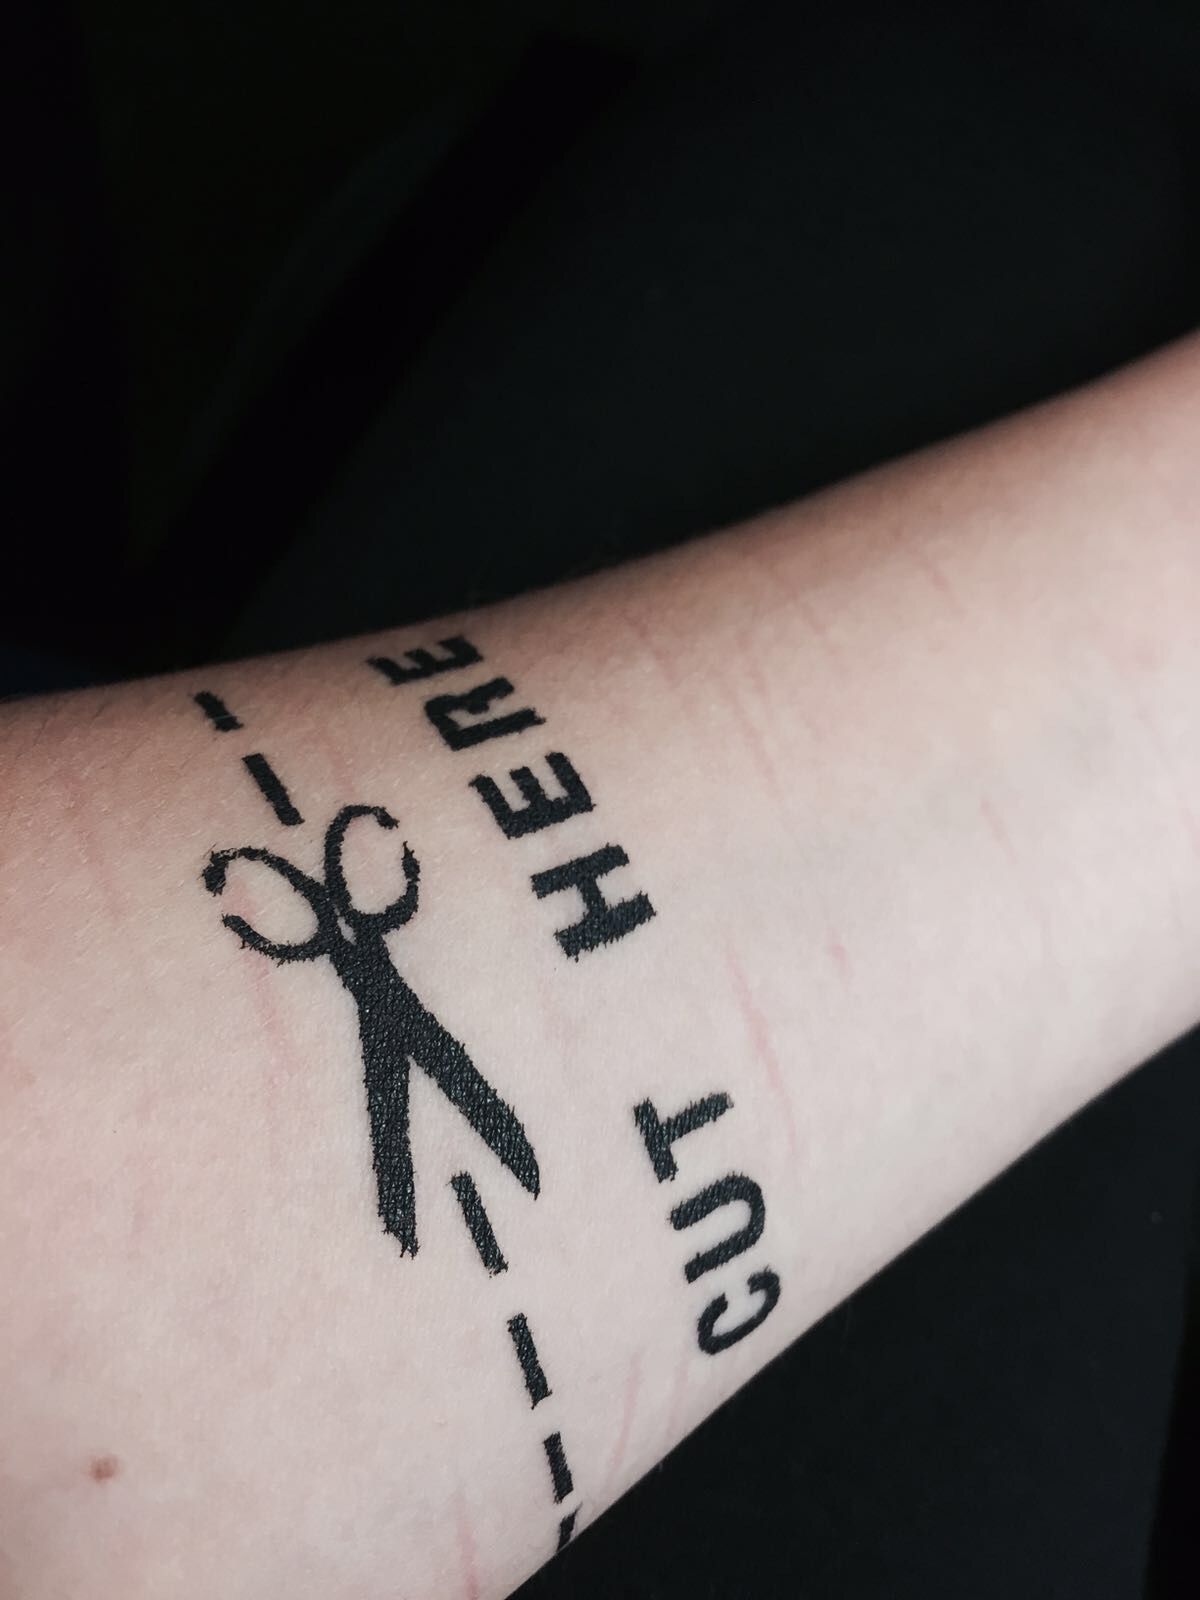 Self Harm Tattoo Meanings: Transformative Tattoos and Recovery Stories